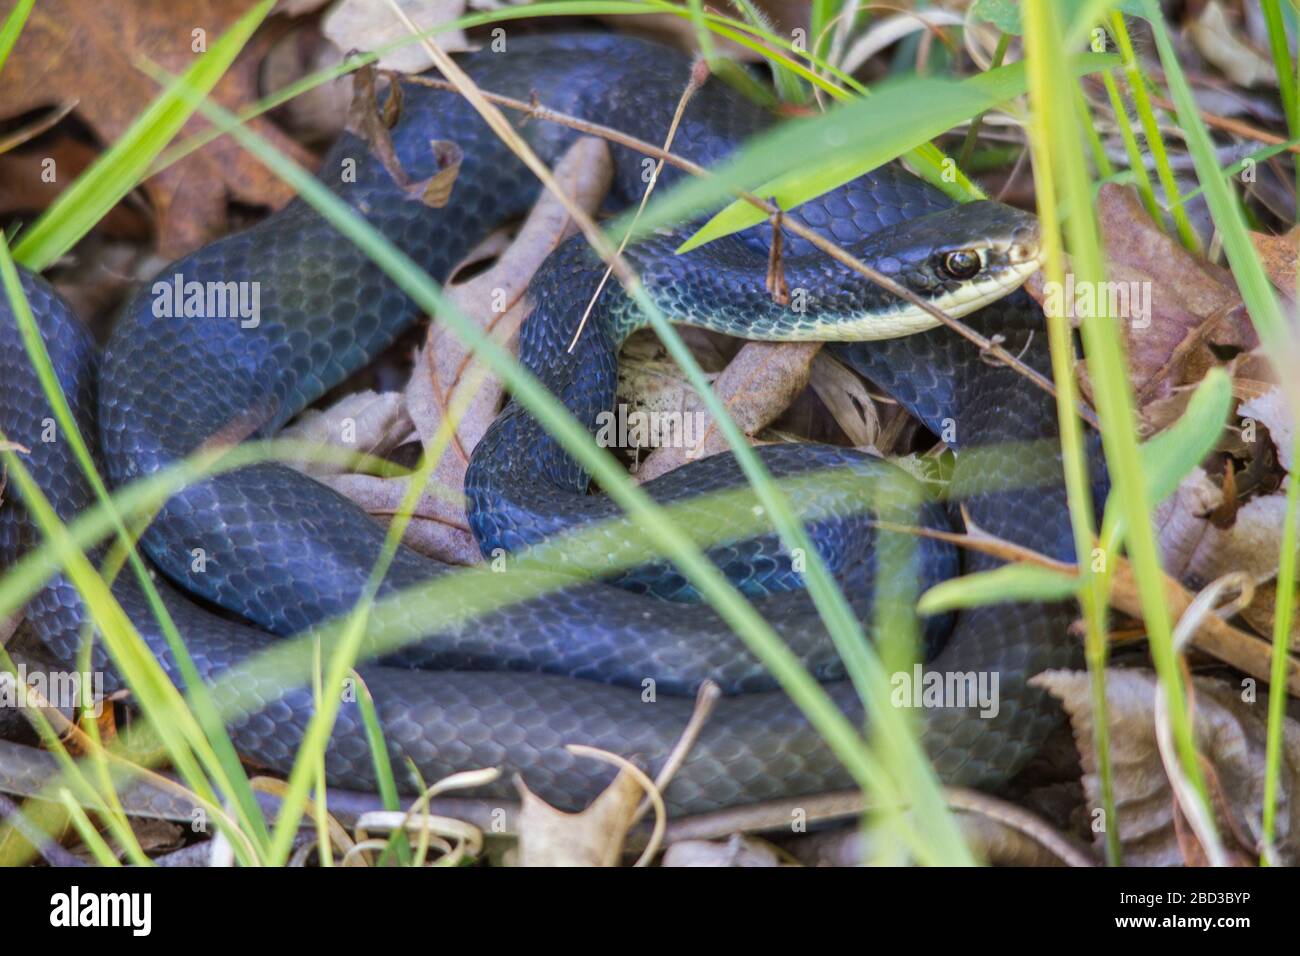 Snake in the grass. Stock Photo